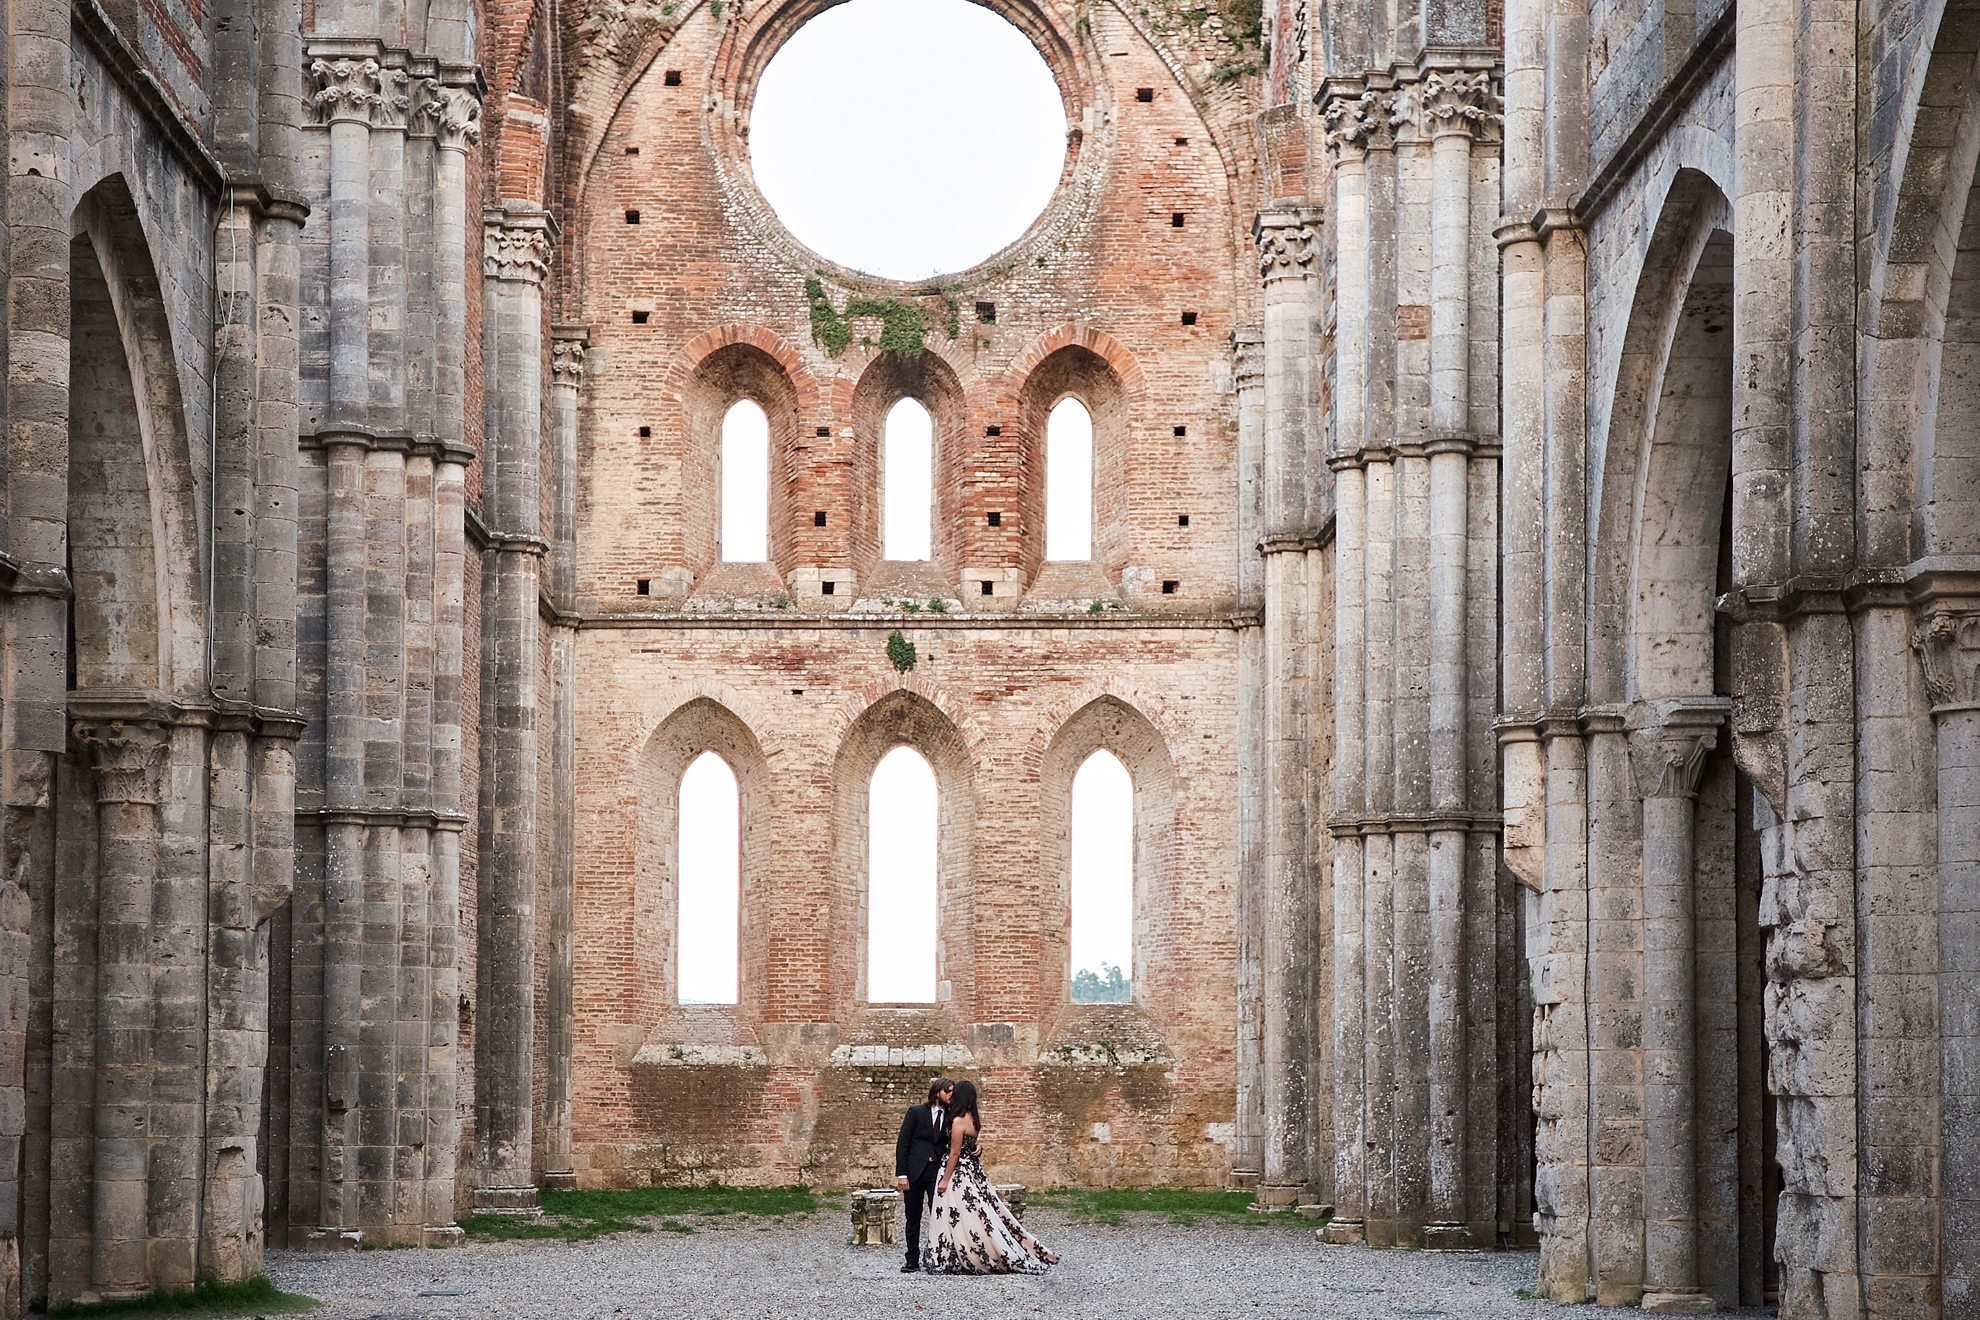  An intimate wedding in the charming Abbey of San Galgano, characterized by the lack of a roof. The civil ceremony celebrated by the Mayor took place on a rainy day, but always with emotion. Particularly the bride's dress with beautiful black embroid